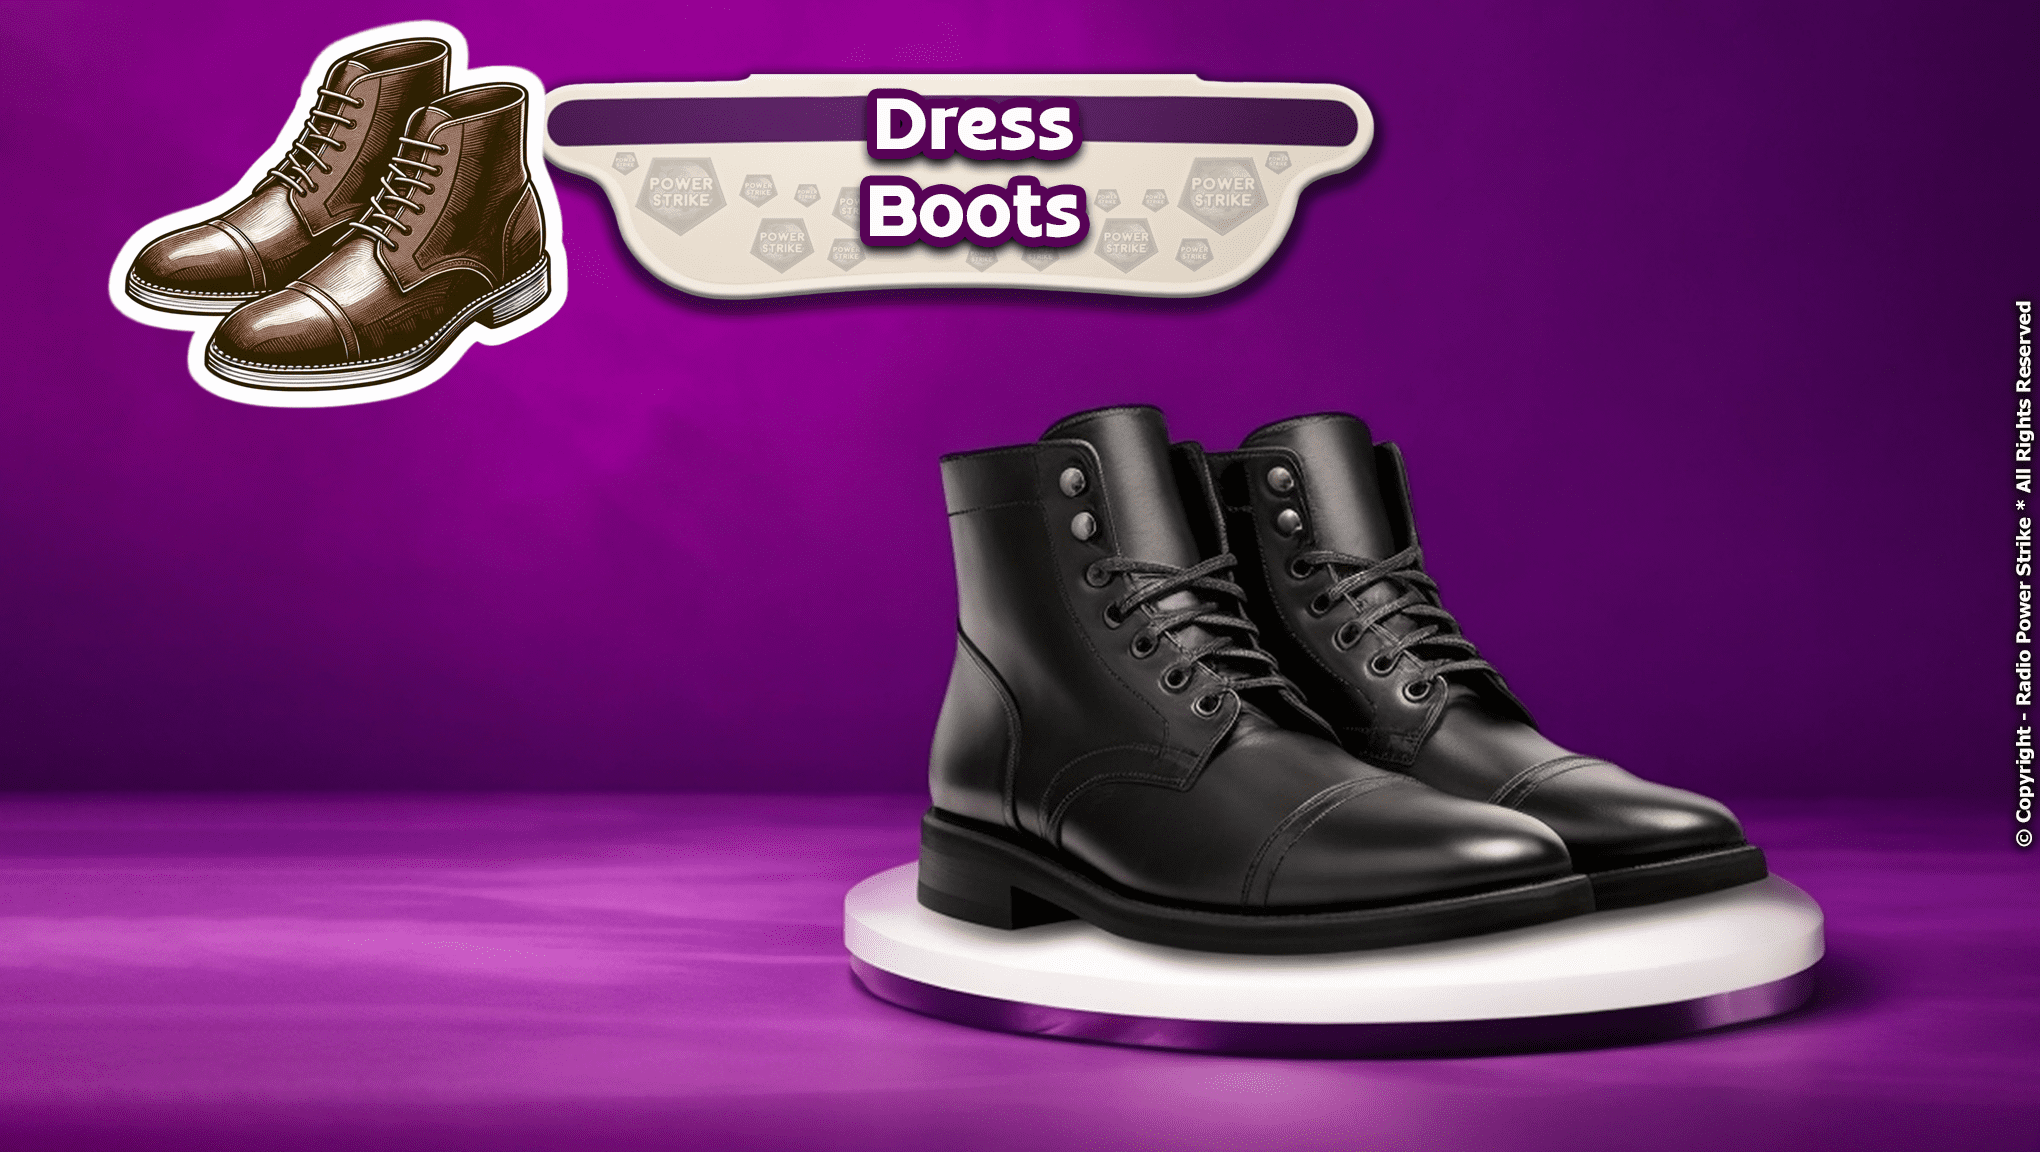 Dress Boots A Comprehensive Guide